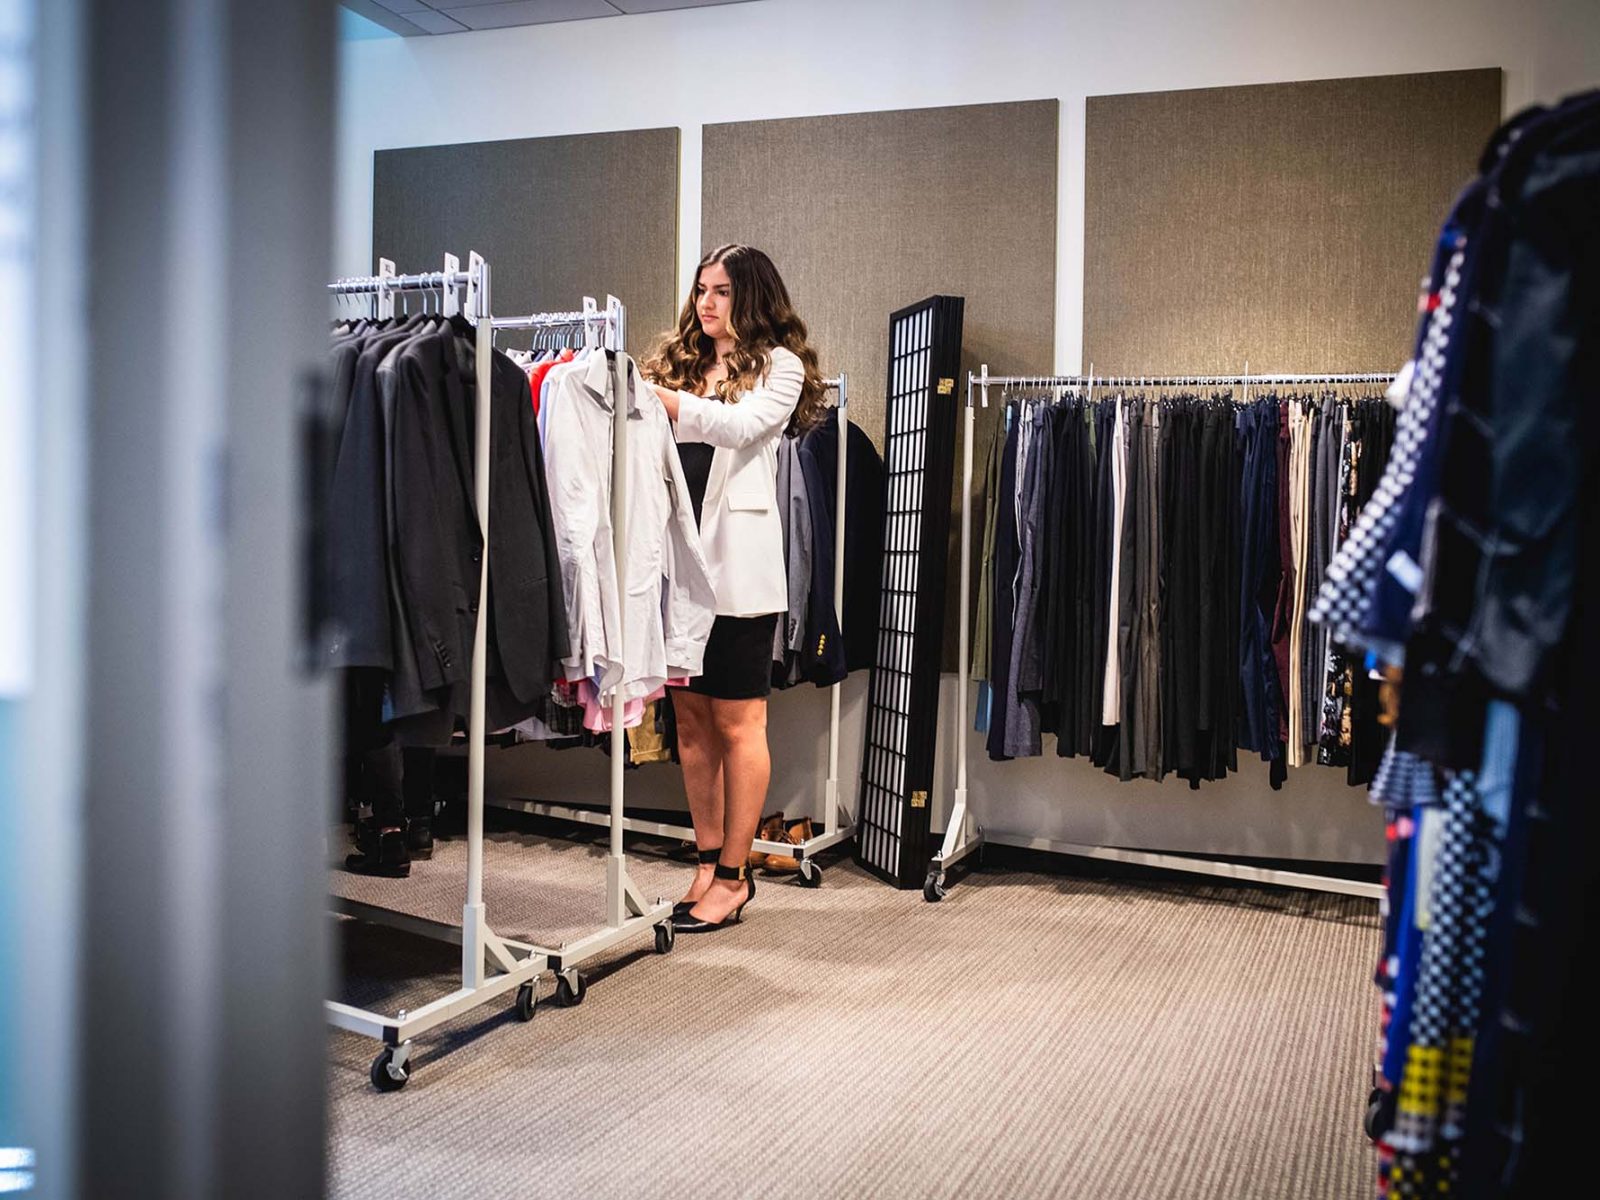 Redesigned Career Closet returns to help students dress for